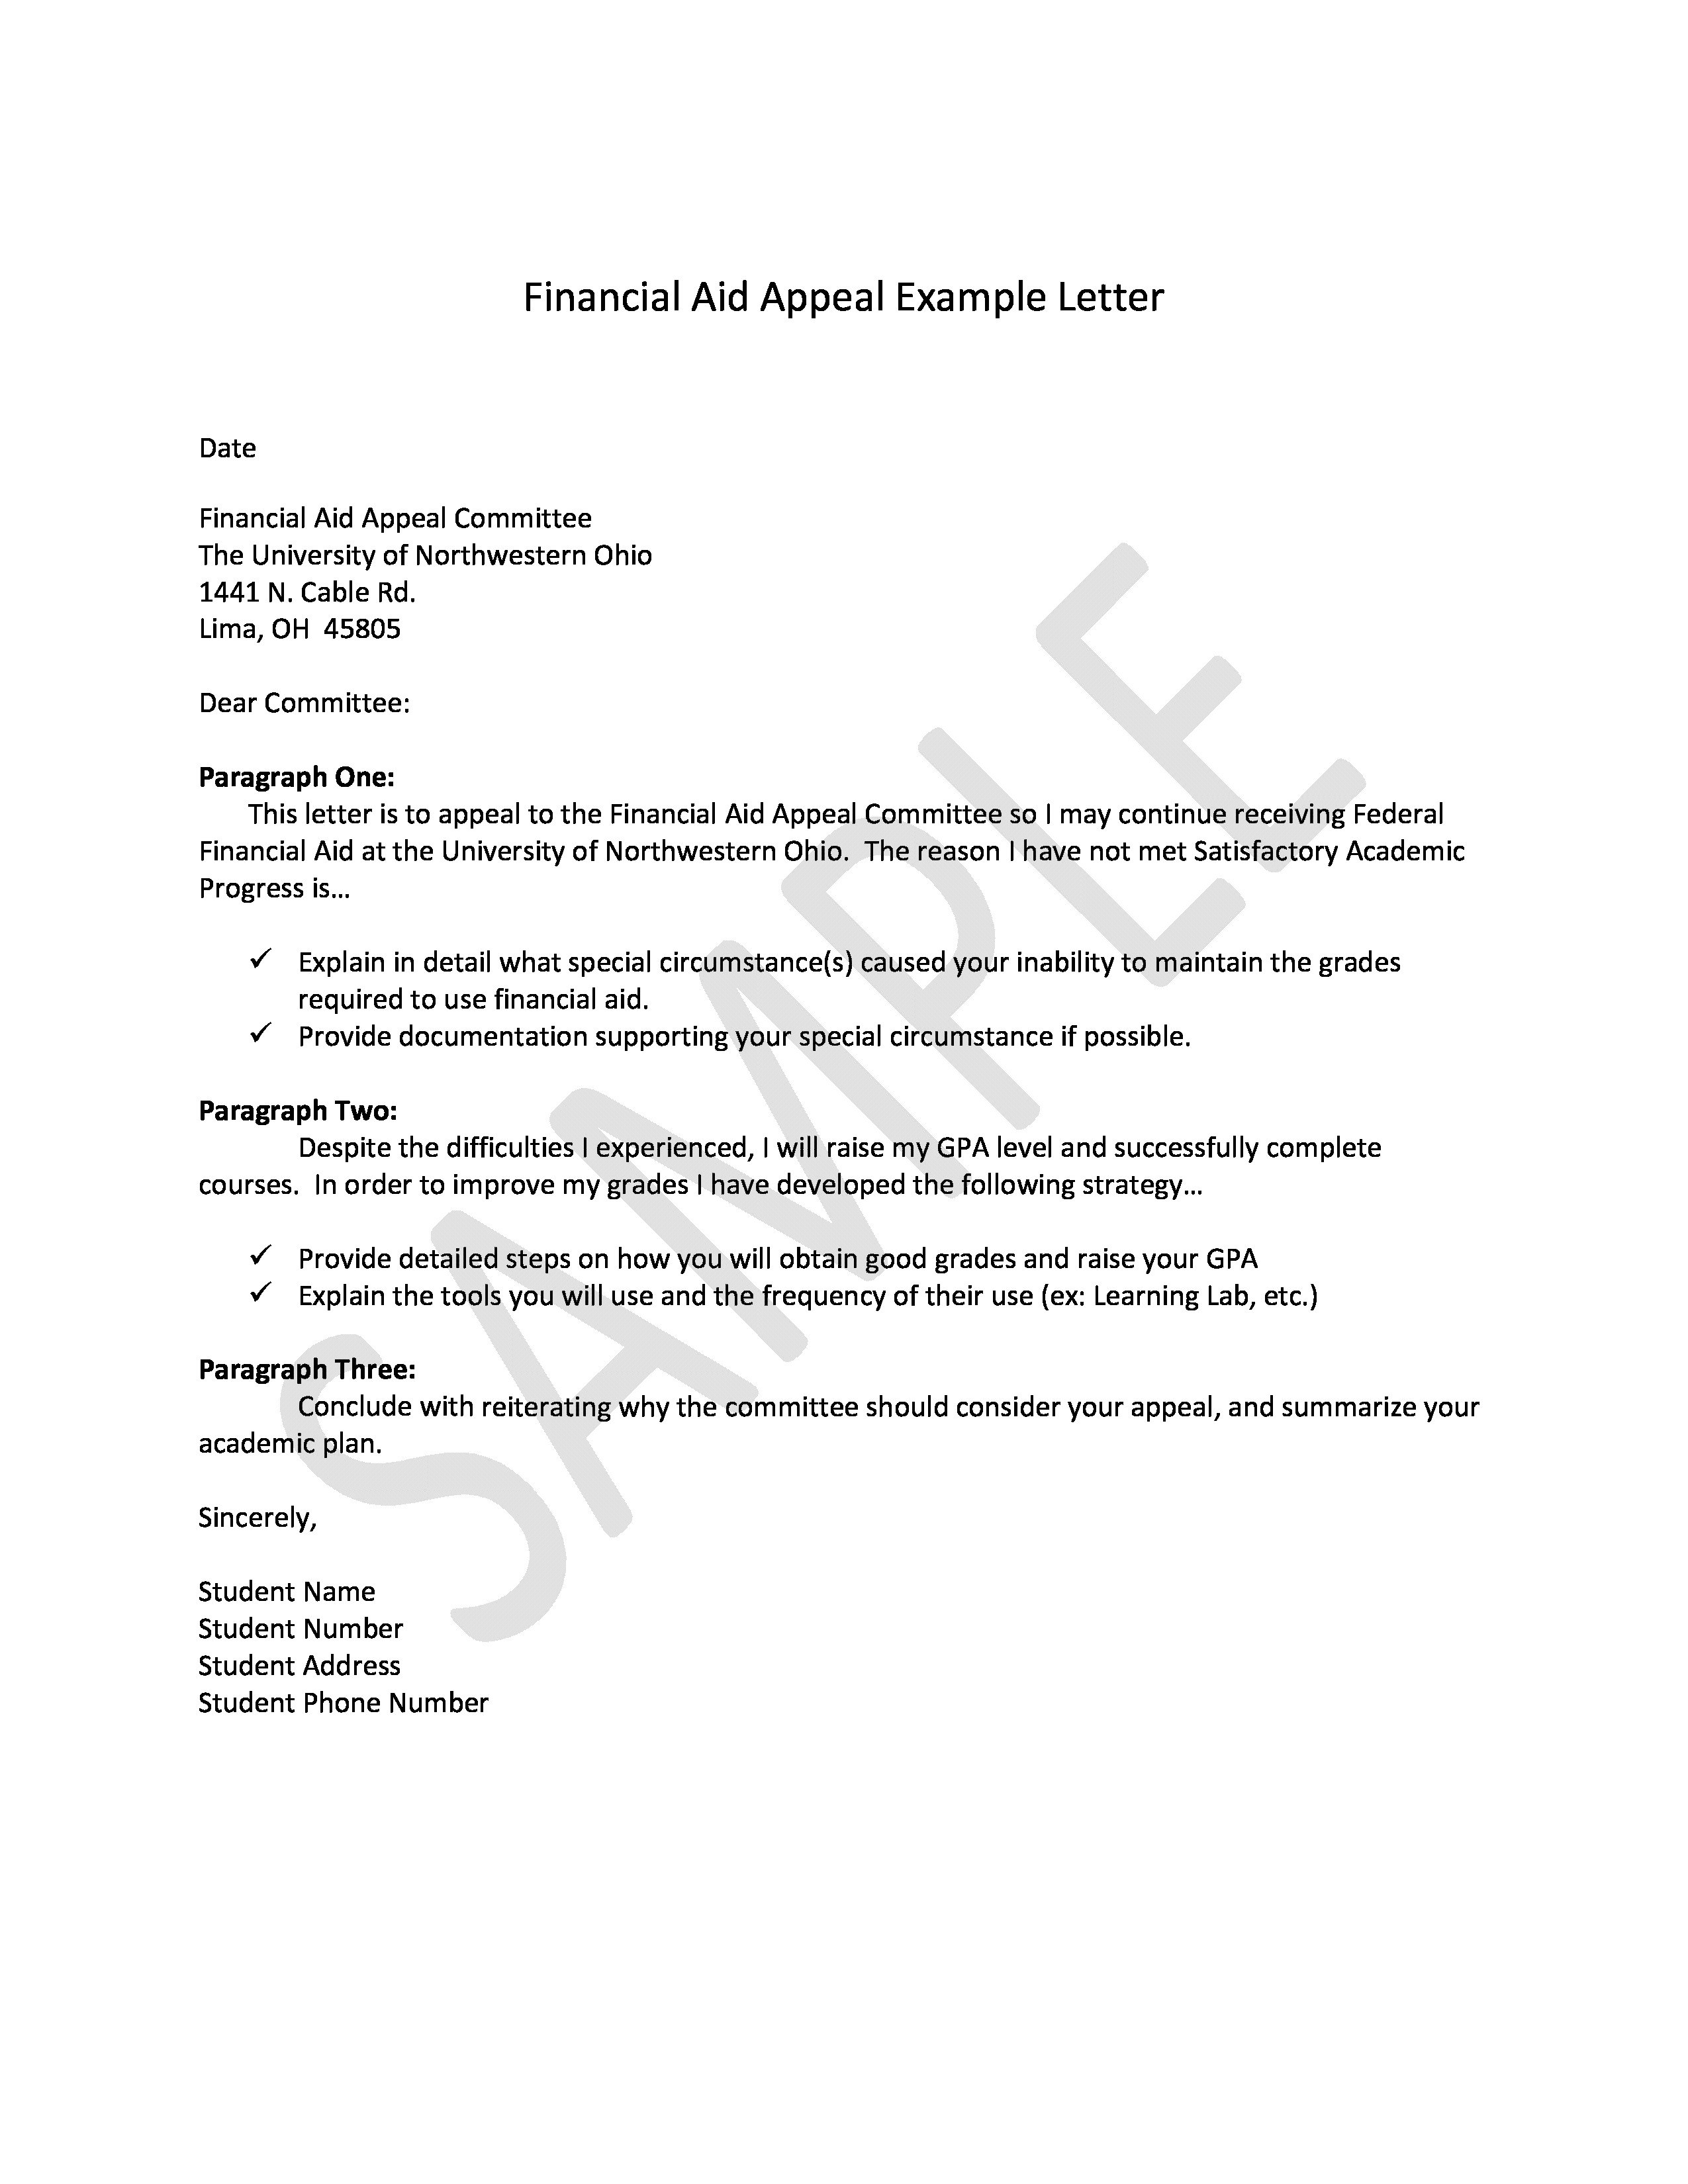 Financial Aid Appeal Letter format Unique Financial Aid Request Letter Sample Beautiful asking for A